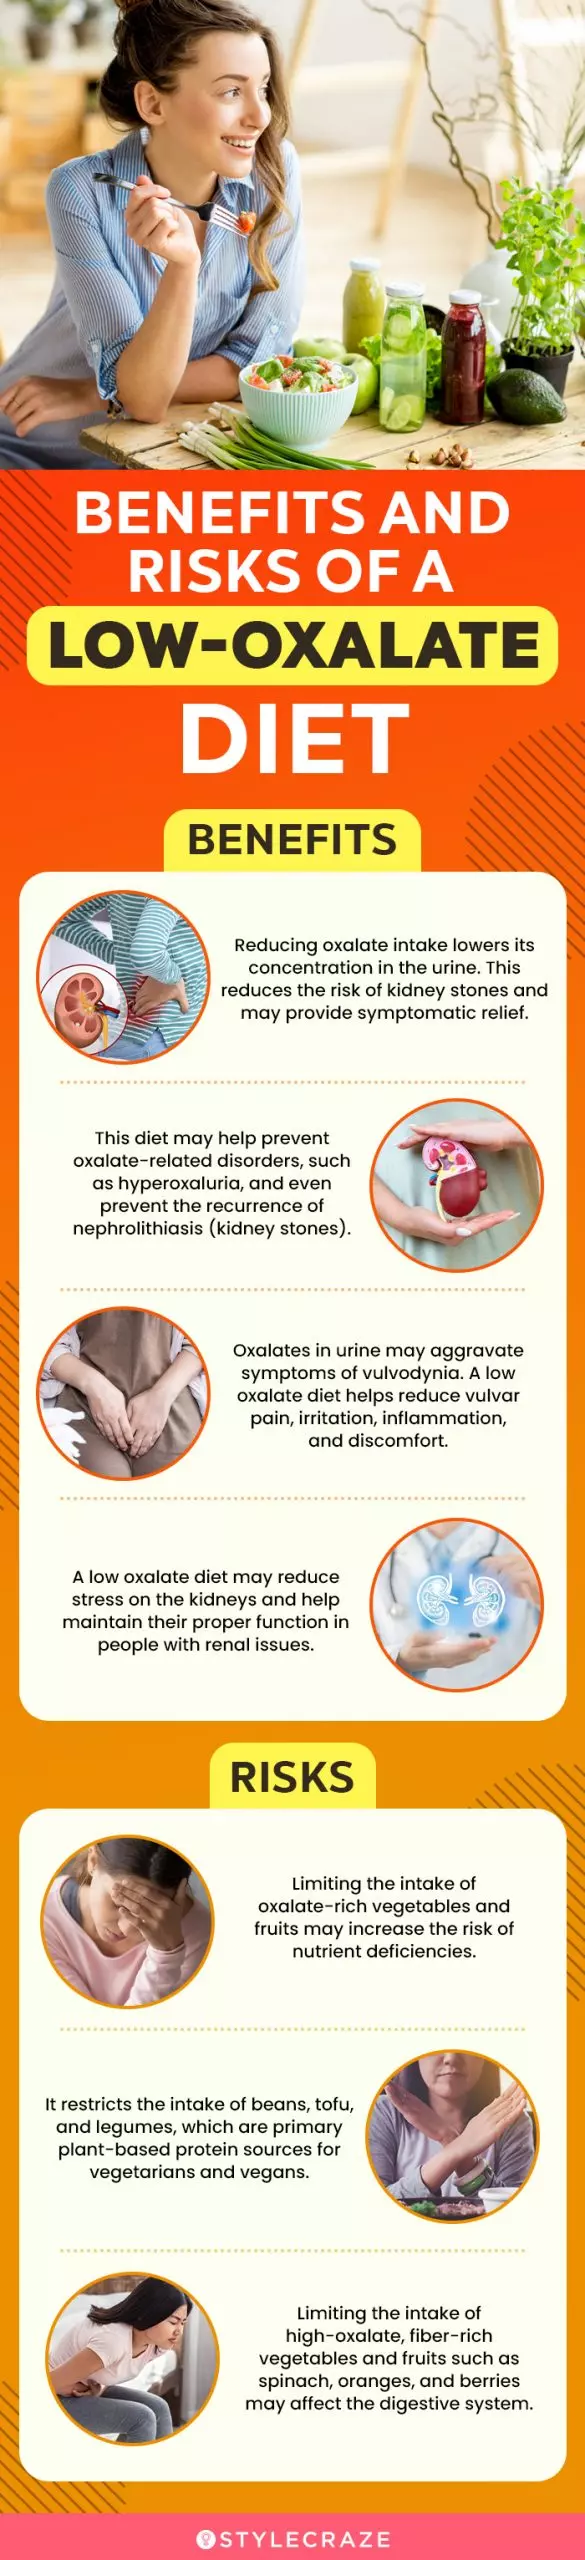 benefits and risks of a low oxalate diet (infographic)